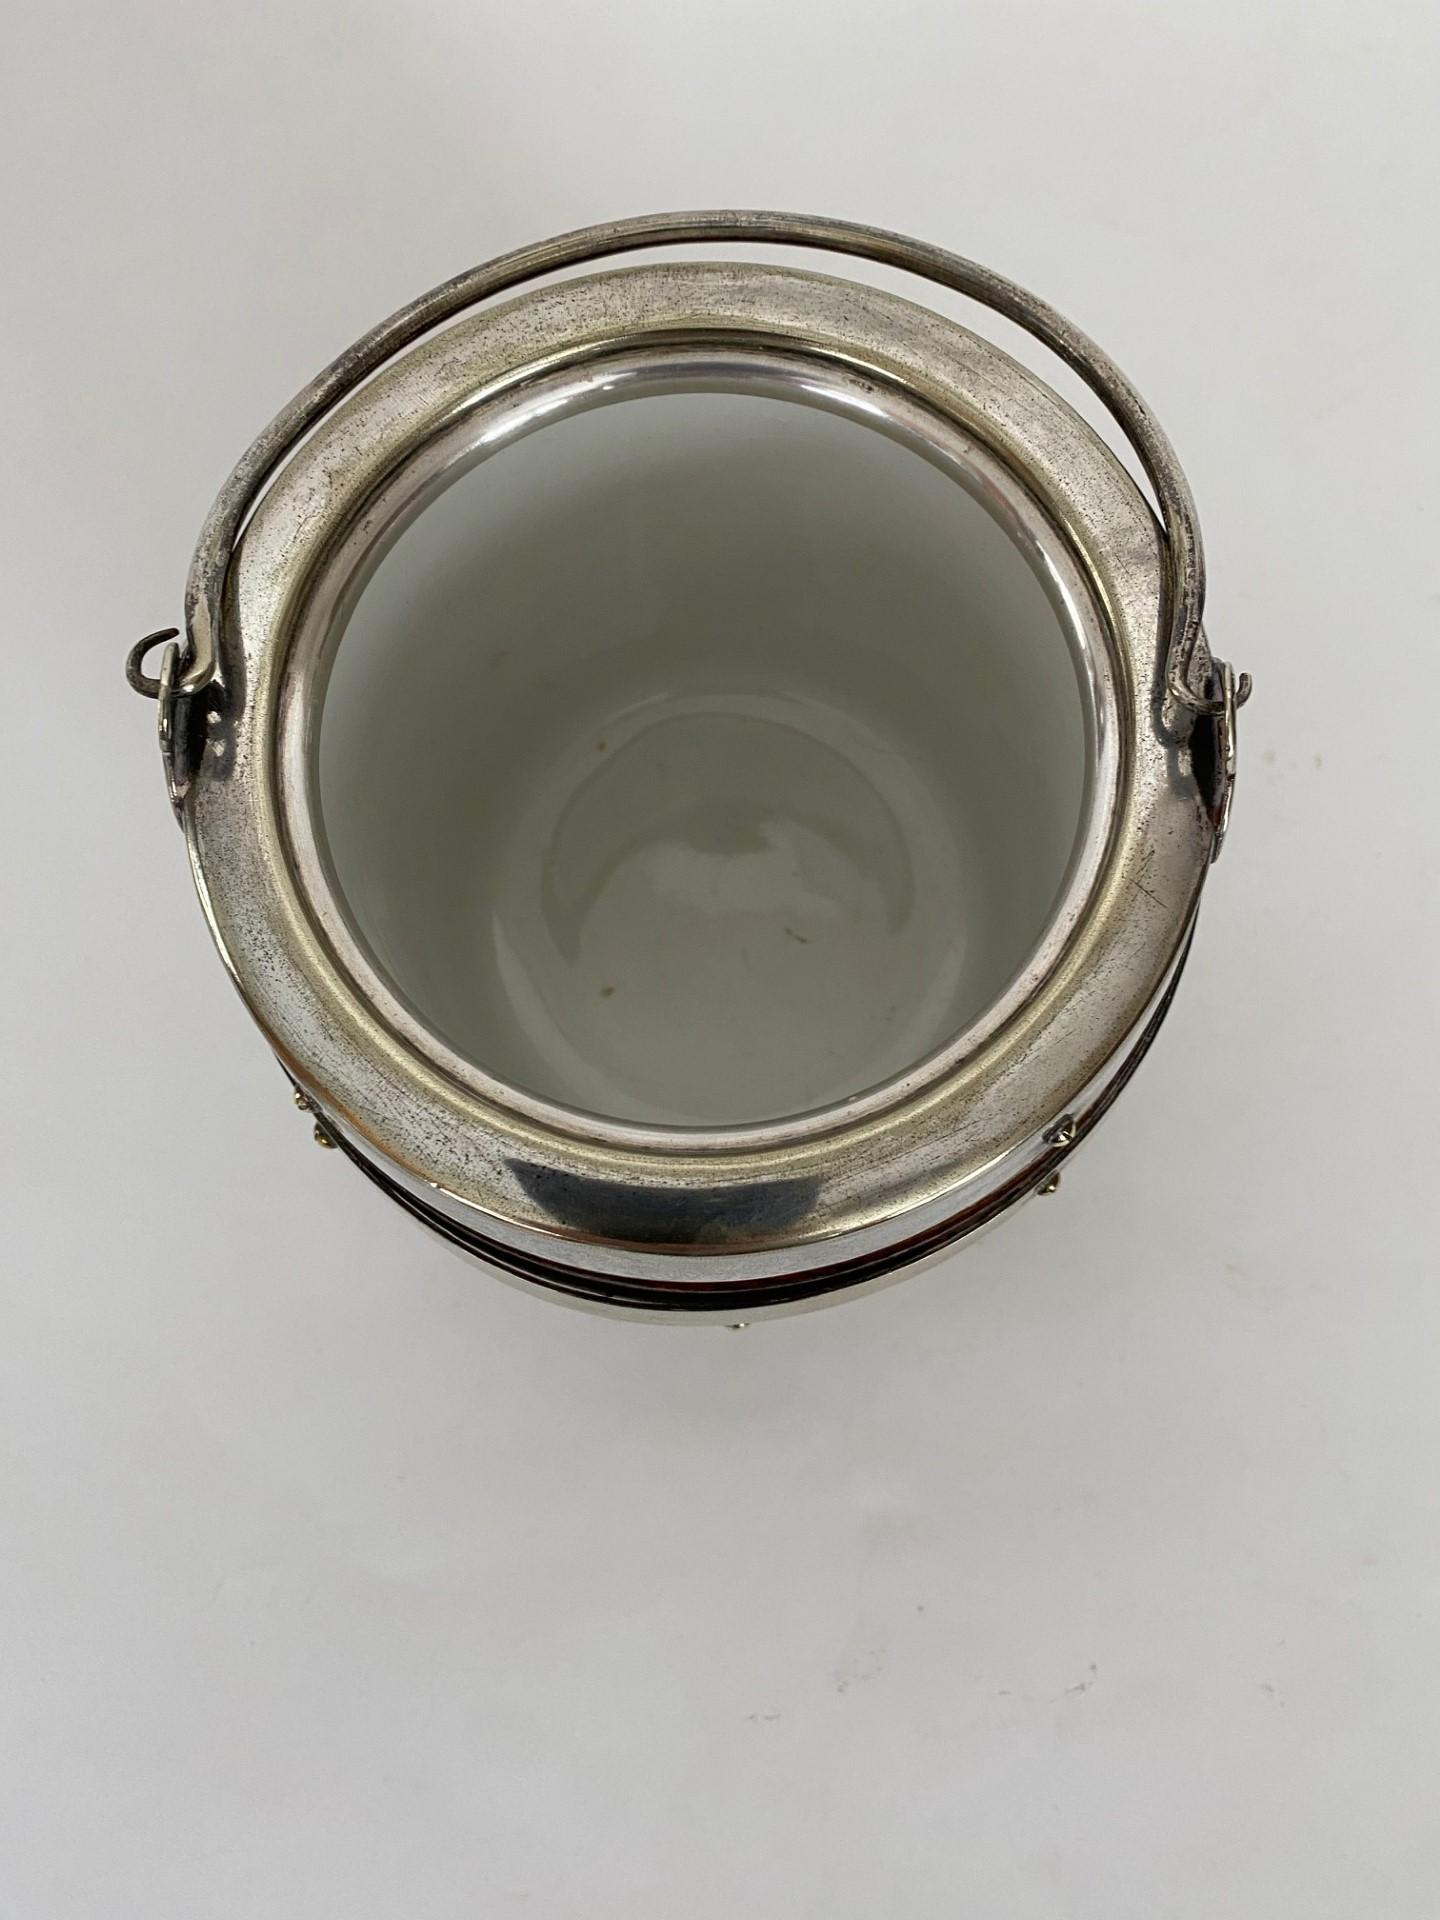 19th Century Oak Biscuit Barrel with Silver Plate Bands & Top. Ceramic Liner For Sale 4